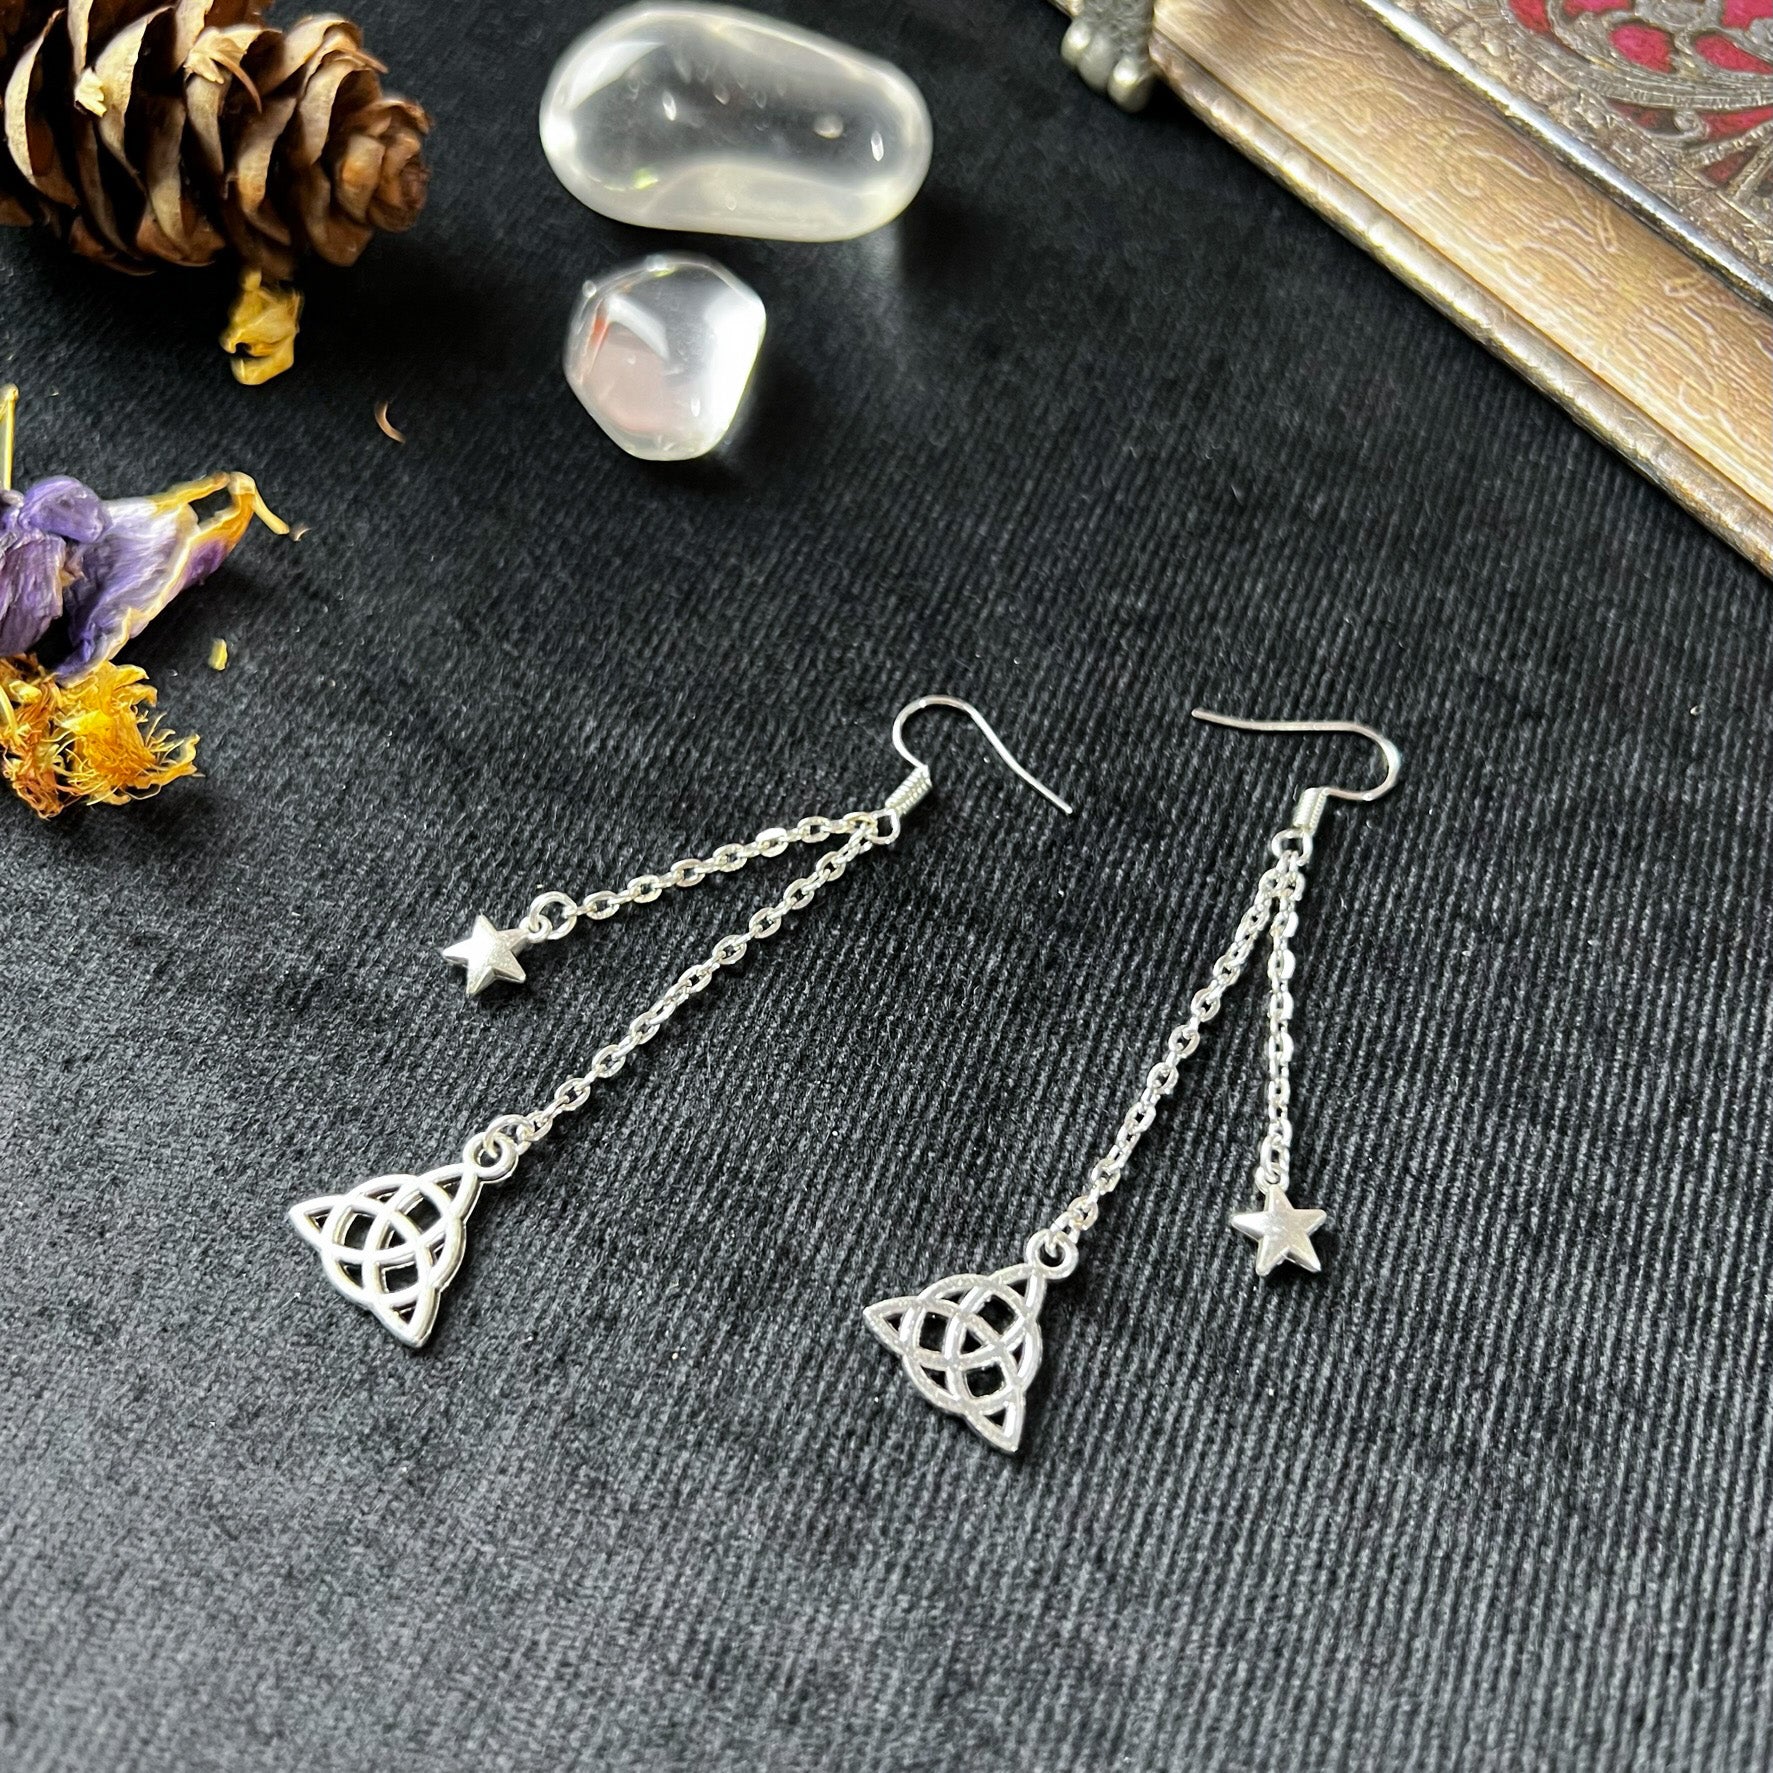 Trinity Celtic knot triquetra and stars earrings - The French Witch shop